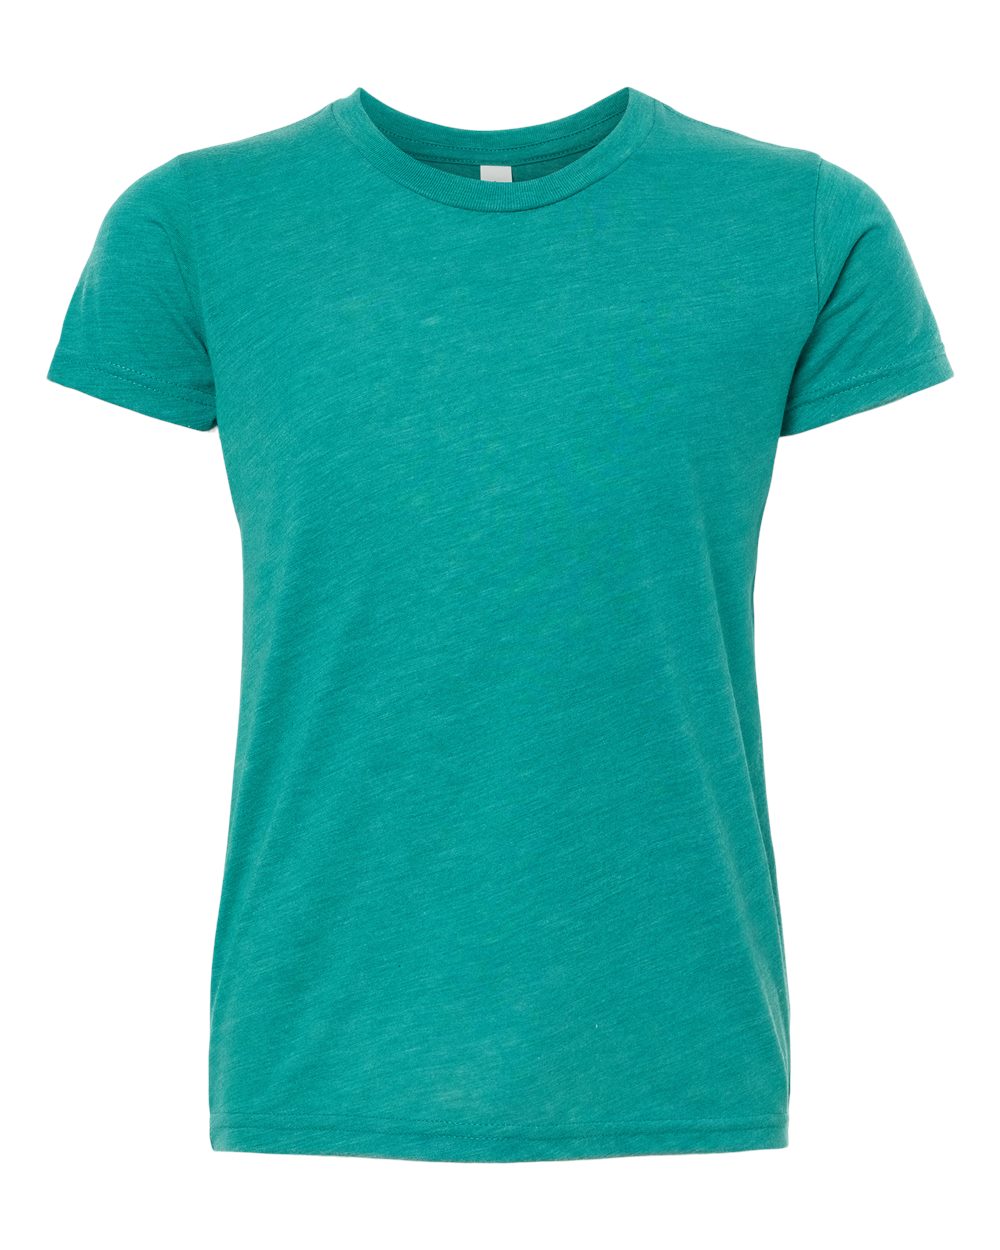 Bella + Canvas Youth Triblend Tee (3413y) in Teal Triblend